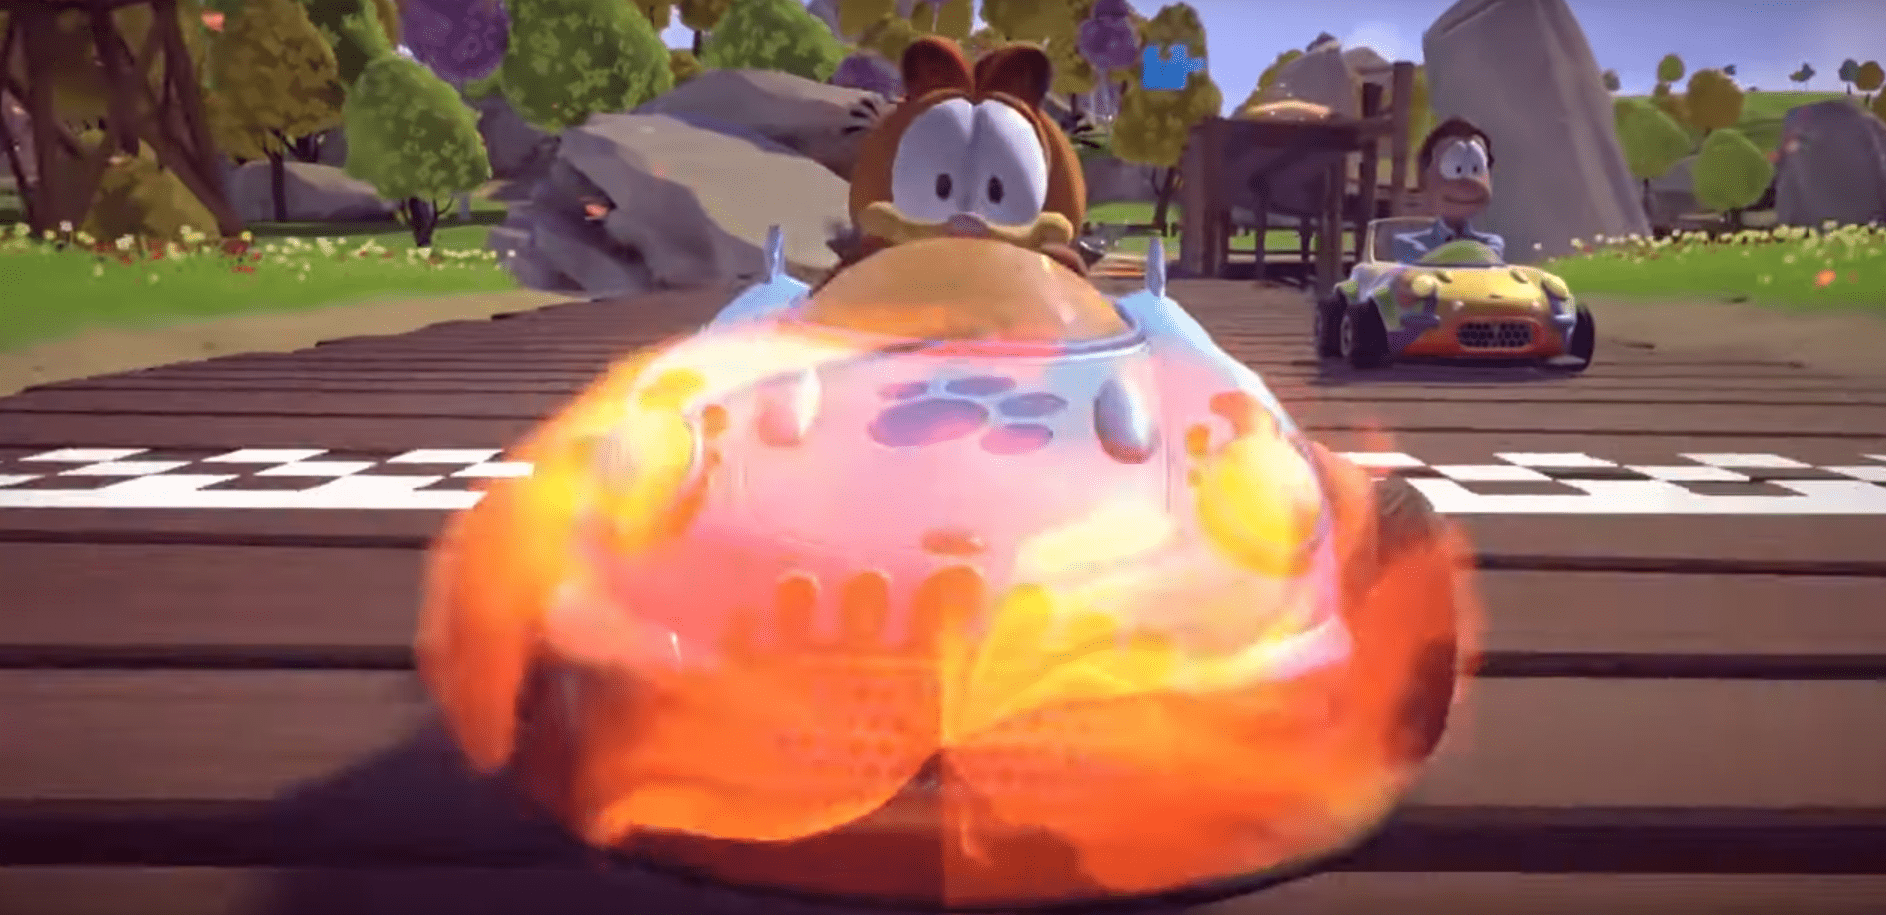 Hold Your Lasagna, Garfield Kart: Furious Racing Is Arriving On Console This Month